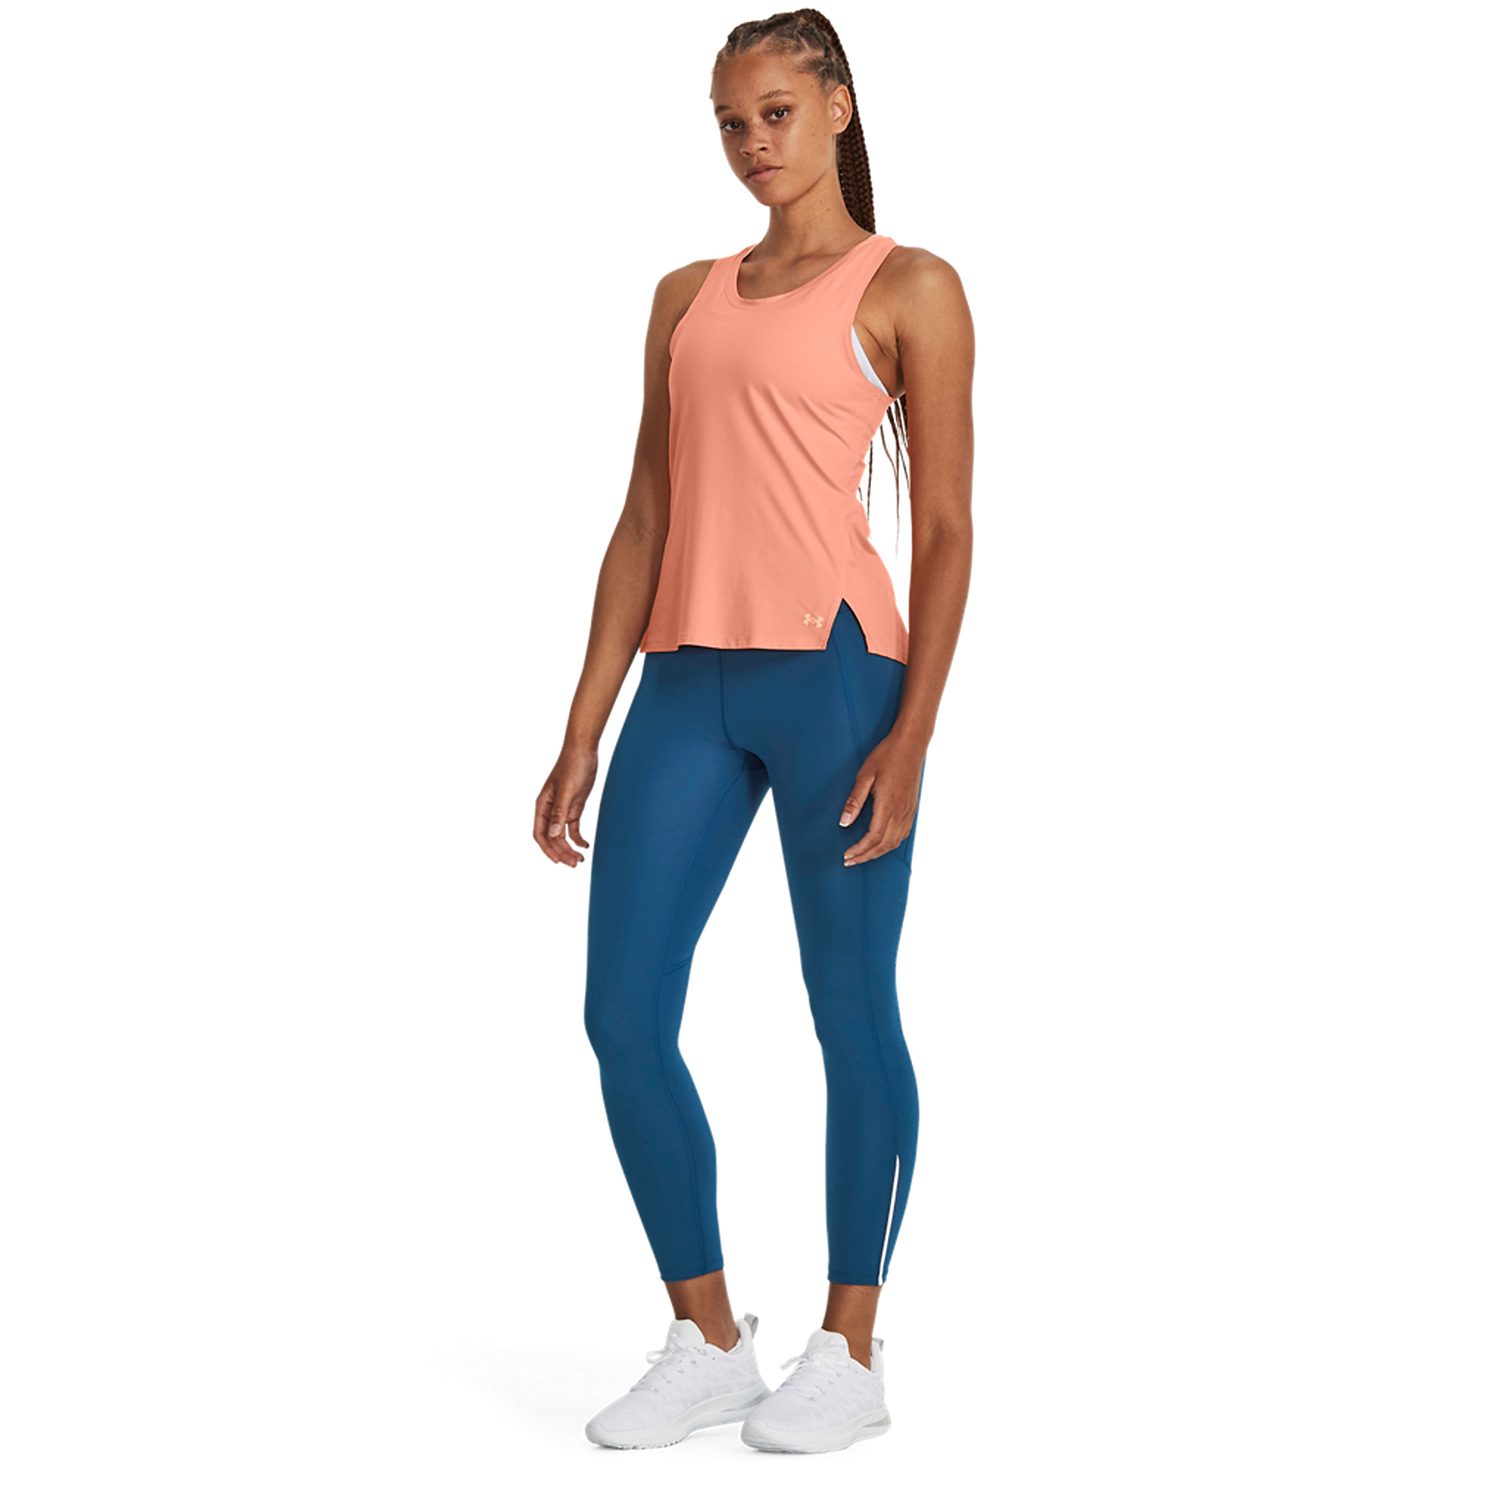 Under Armour Fly Fast 3.0 Women's Running Tights - Beta